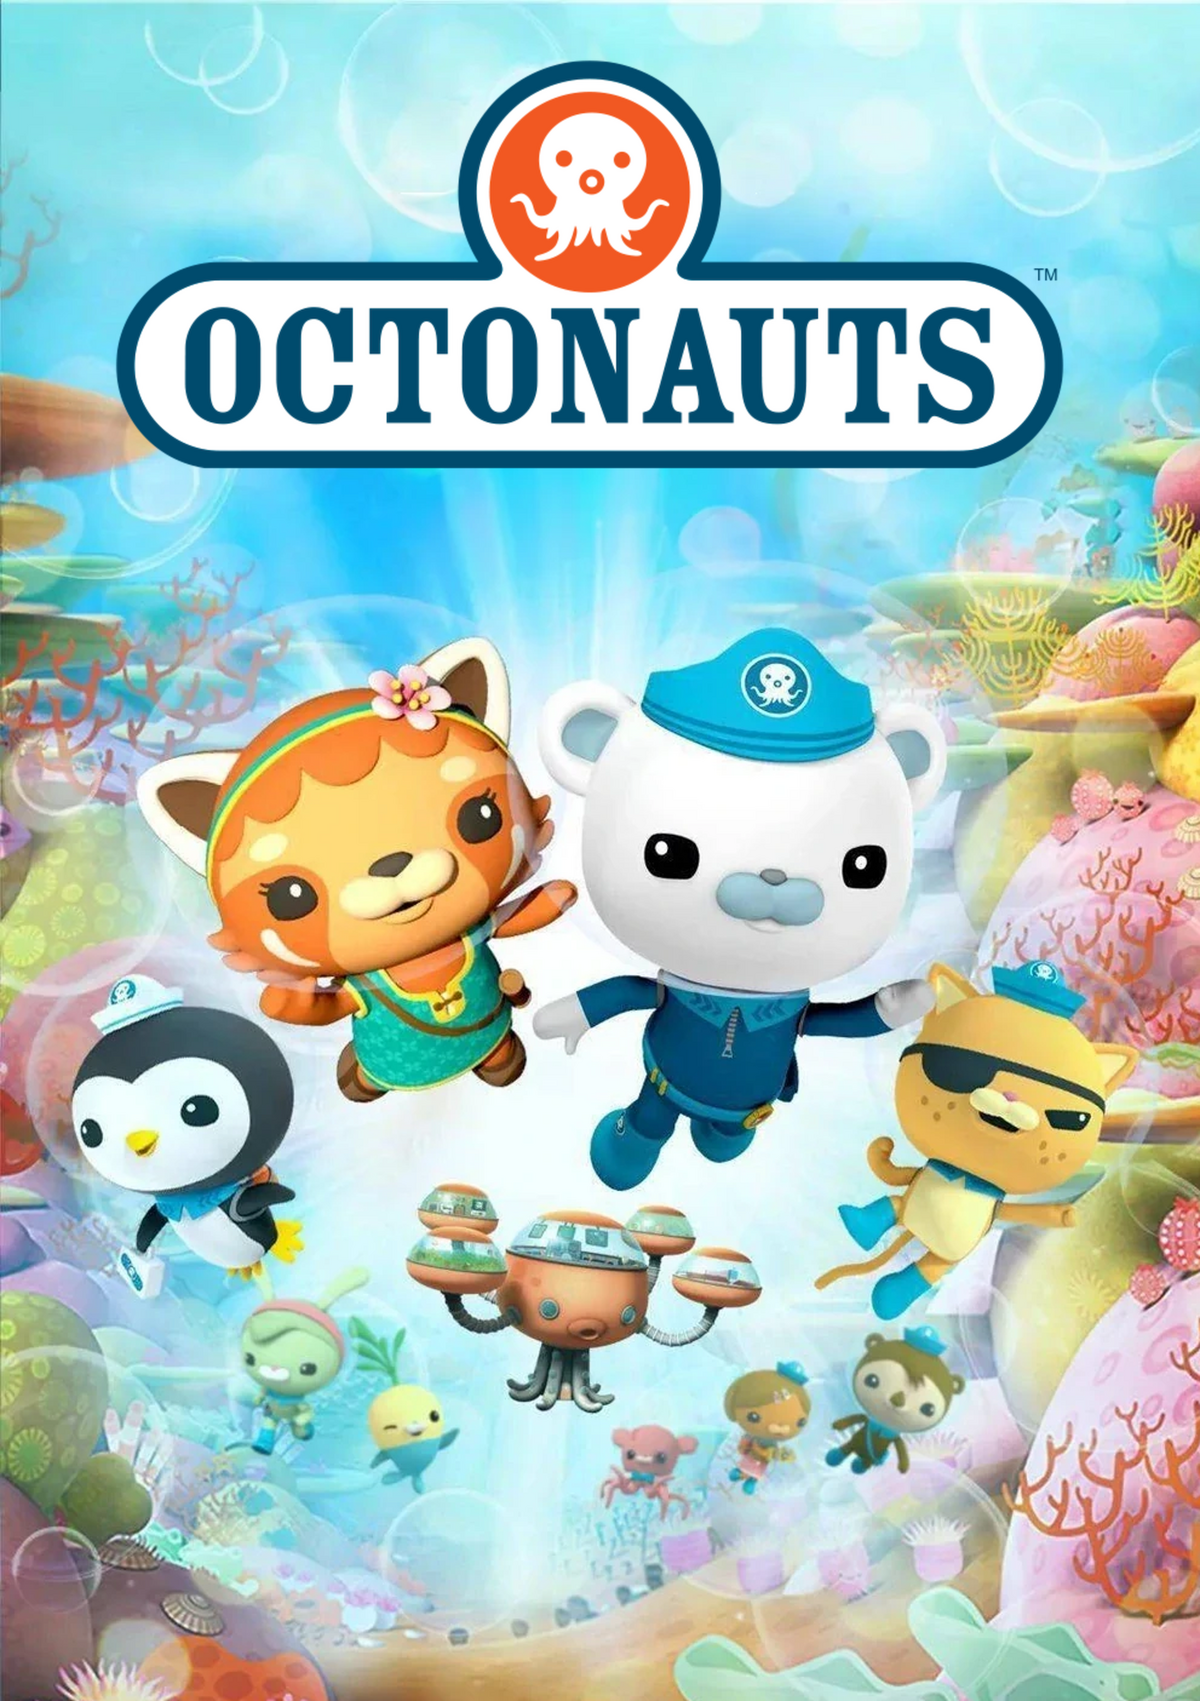 https://static.wikia.nocookie.net/octonauts/images/0/0b/Season_5_Cover.png/revision/latest/scale-to-width-down/1200?cb=20230327161728